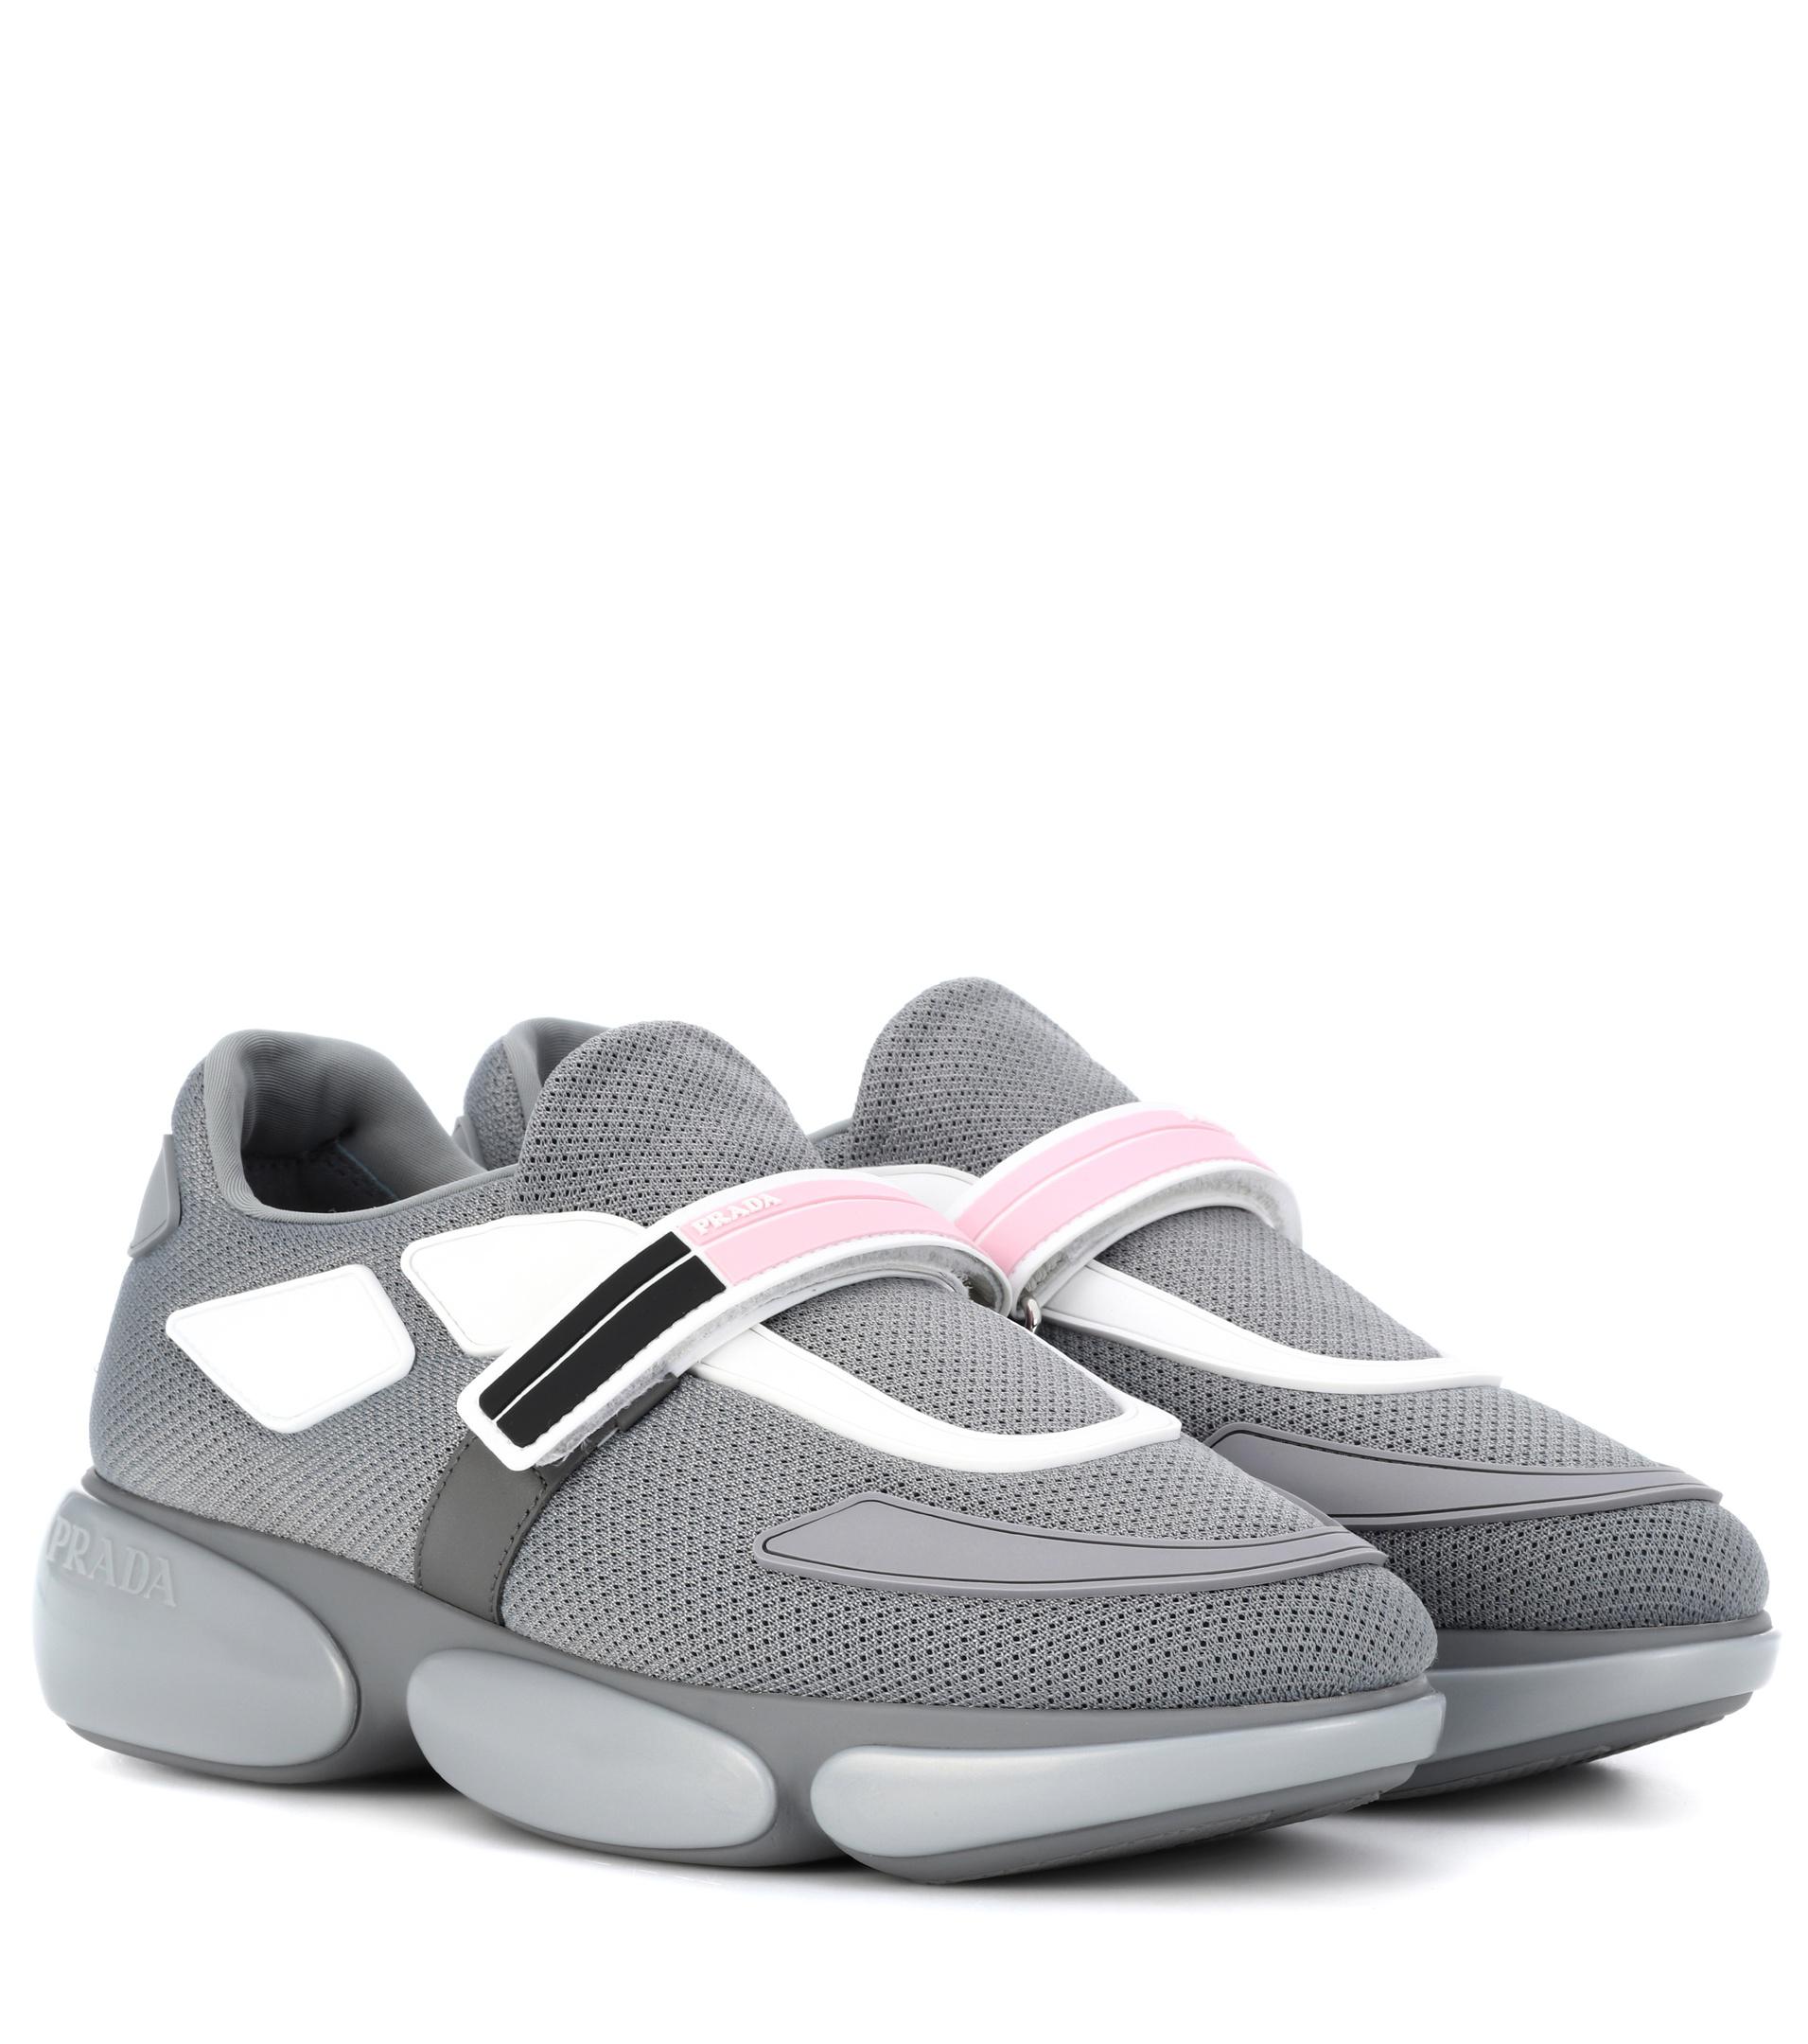 Prada Cloudbust Leather-trimmed Mesh Sneakers in Grey (Gray) - Lyst